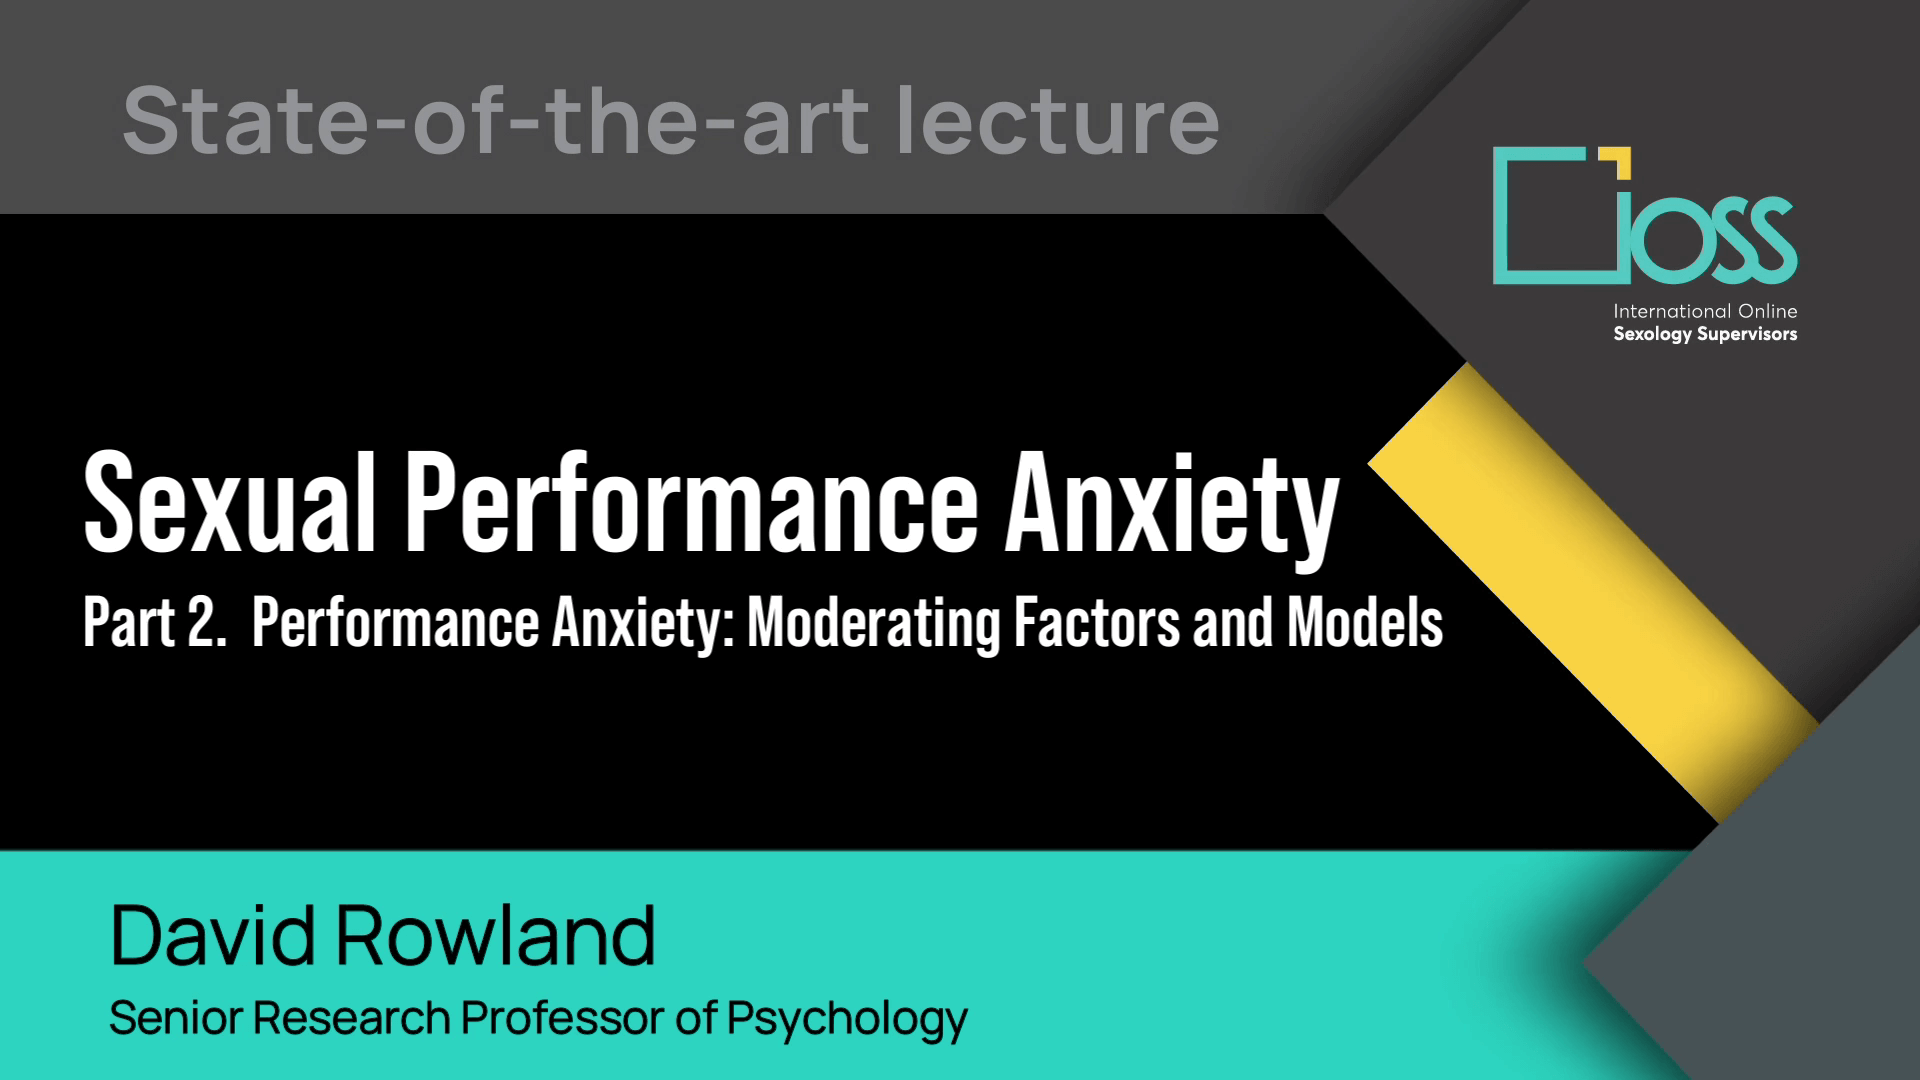 Sexual Performance Anxiety – Part 2: Performance Anxiety: Moderating Factors and Models